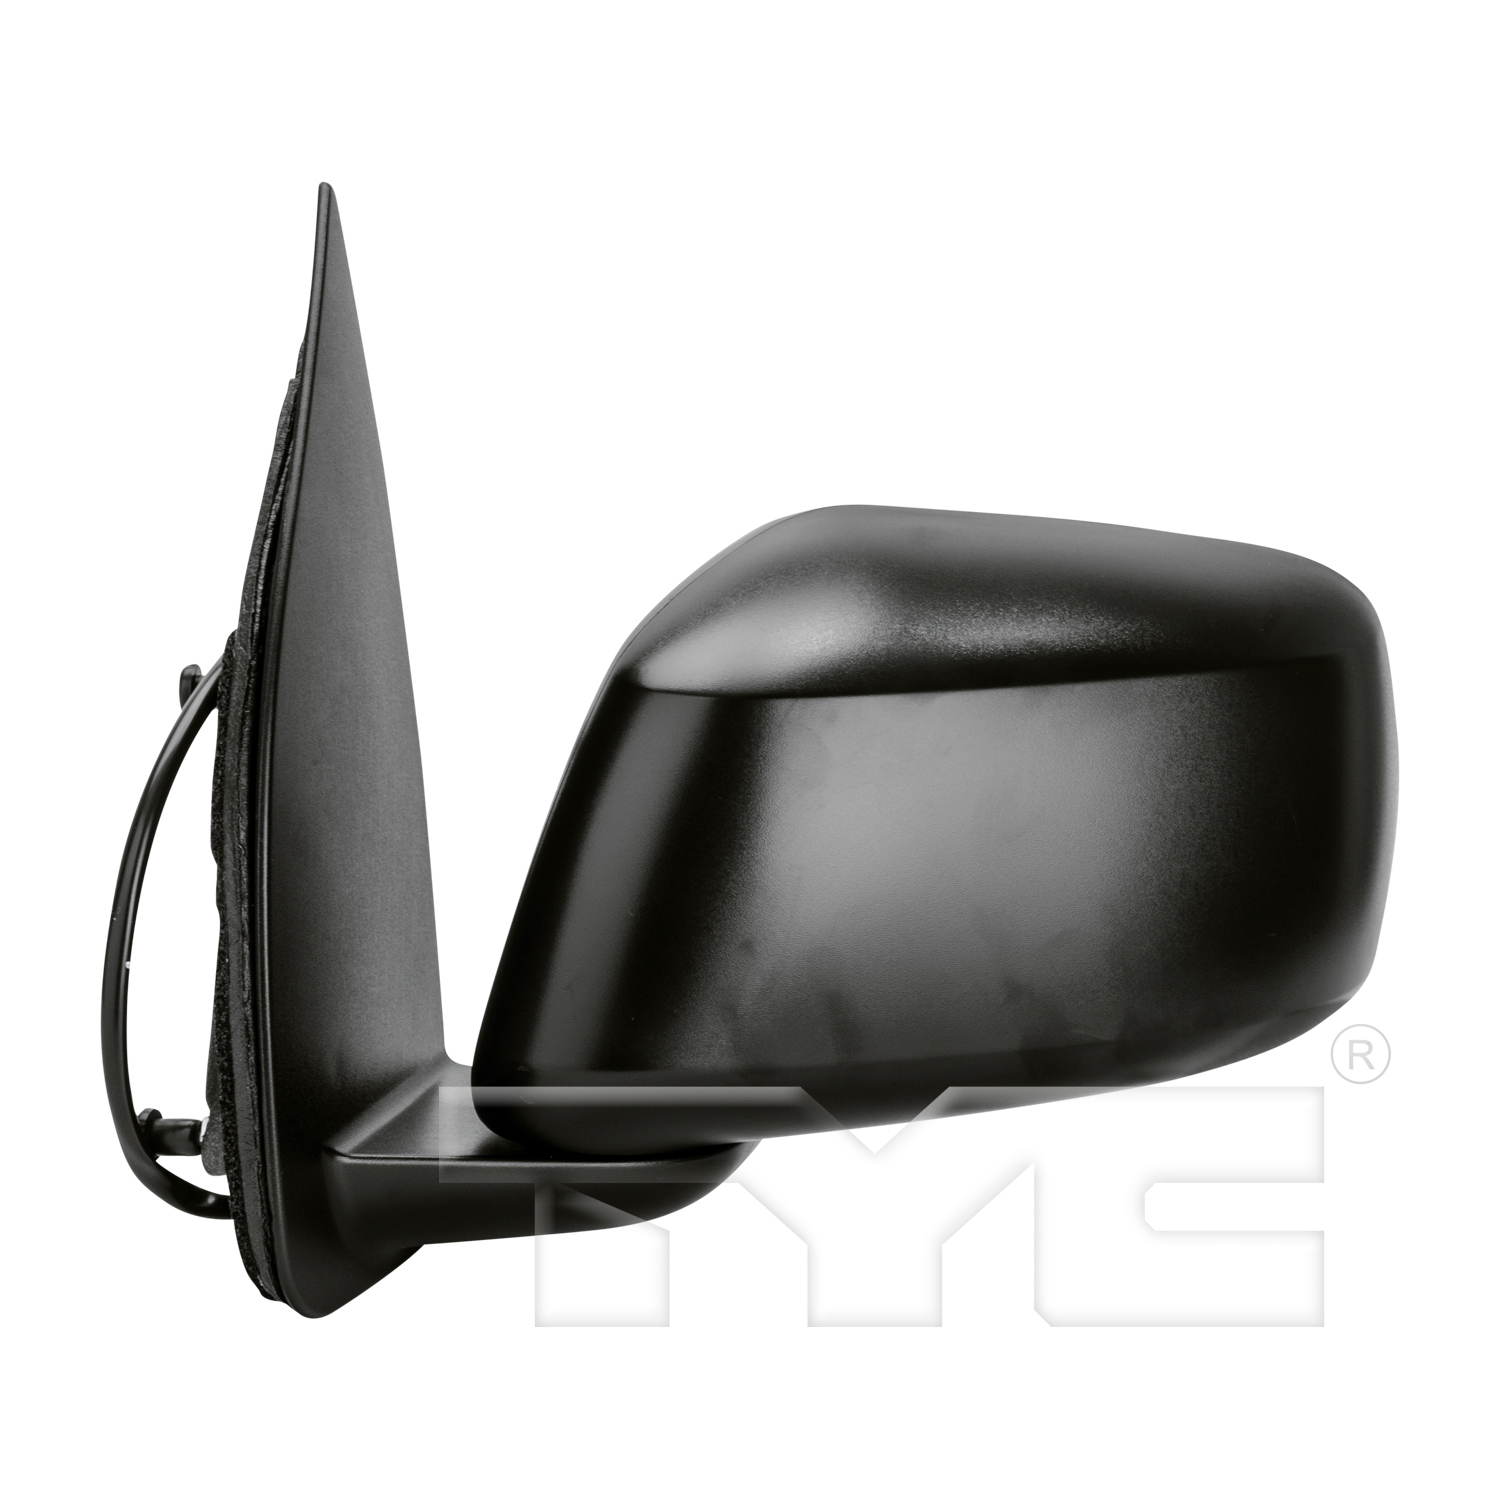 Aftermarket MIRRORS for NISSAN - FRONTIER, FRONTIER,05-09,LT Mirror outside rear view